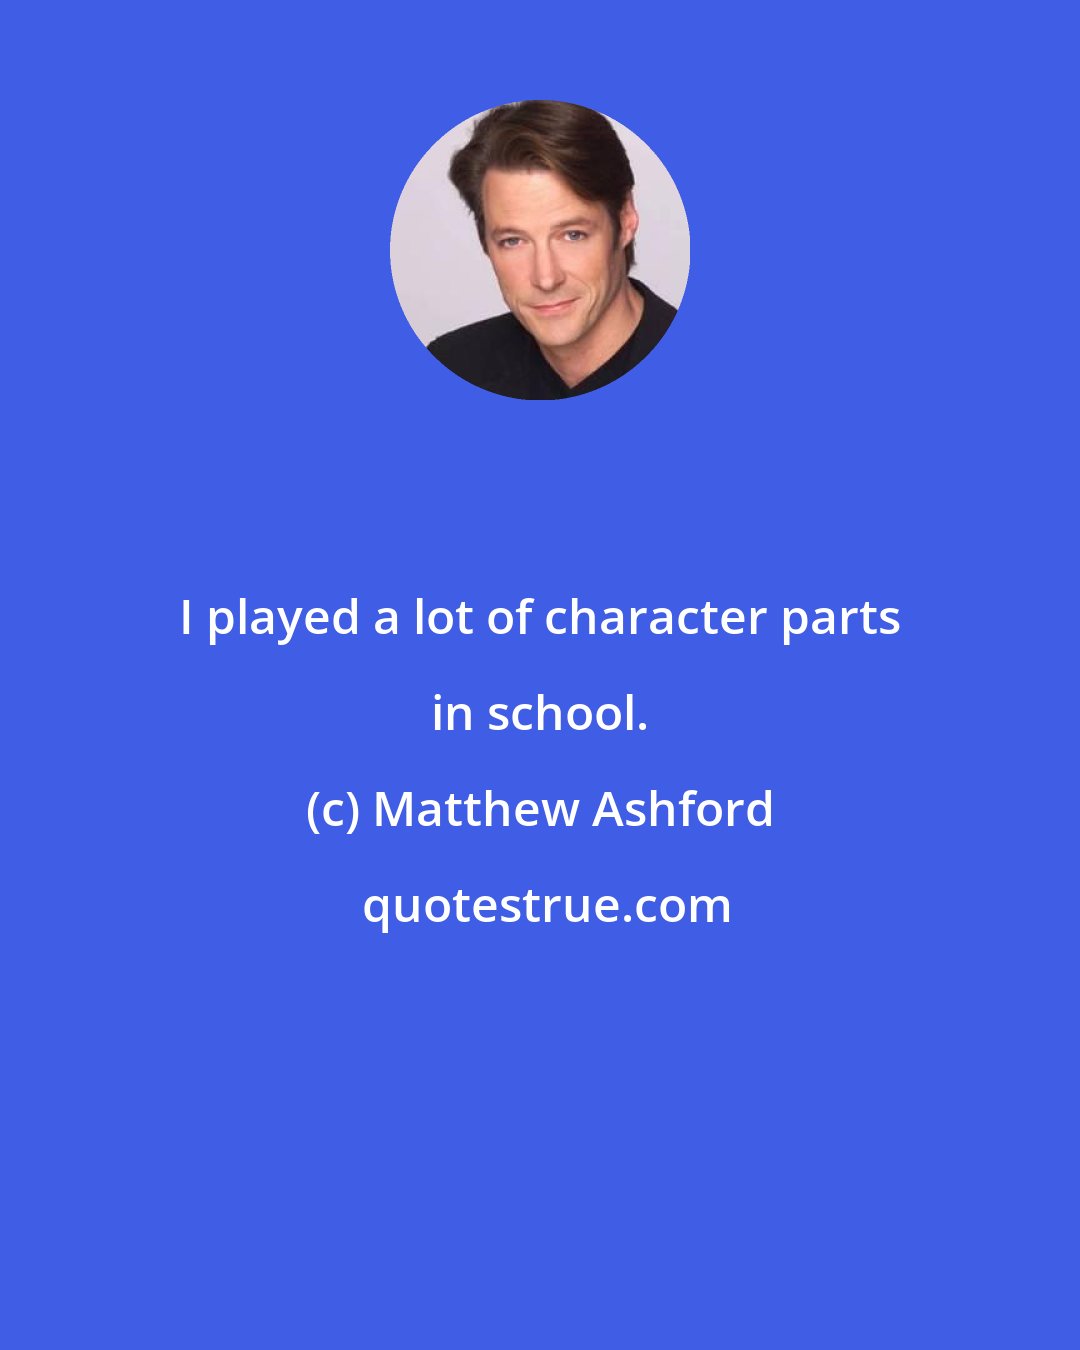 Matthew Ashford: I played a lot of character parts in school.